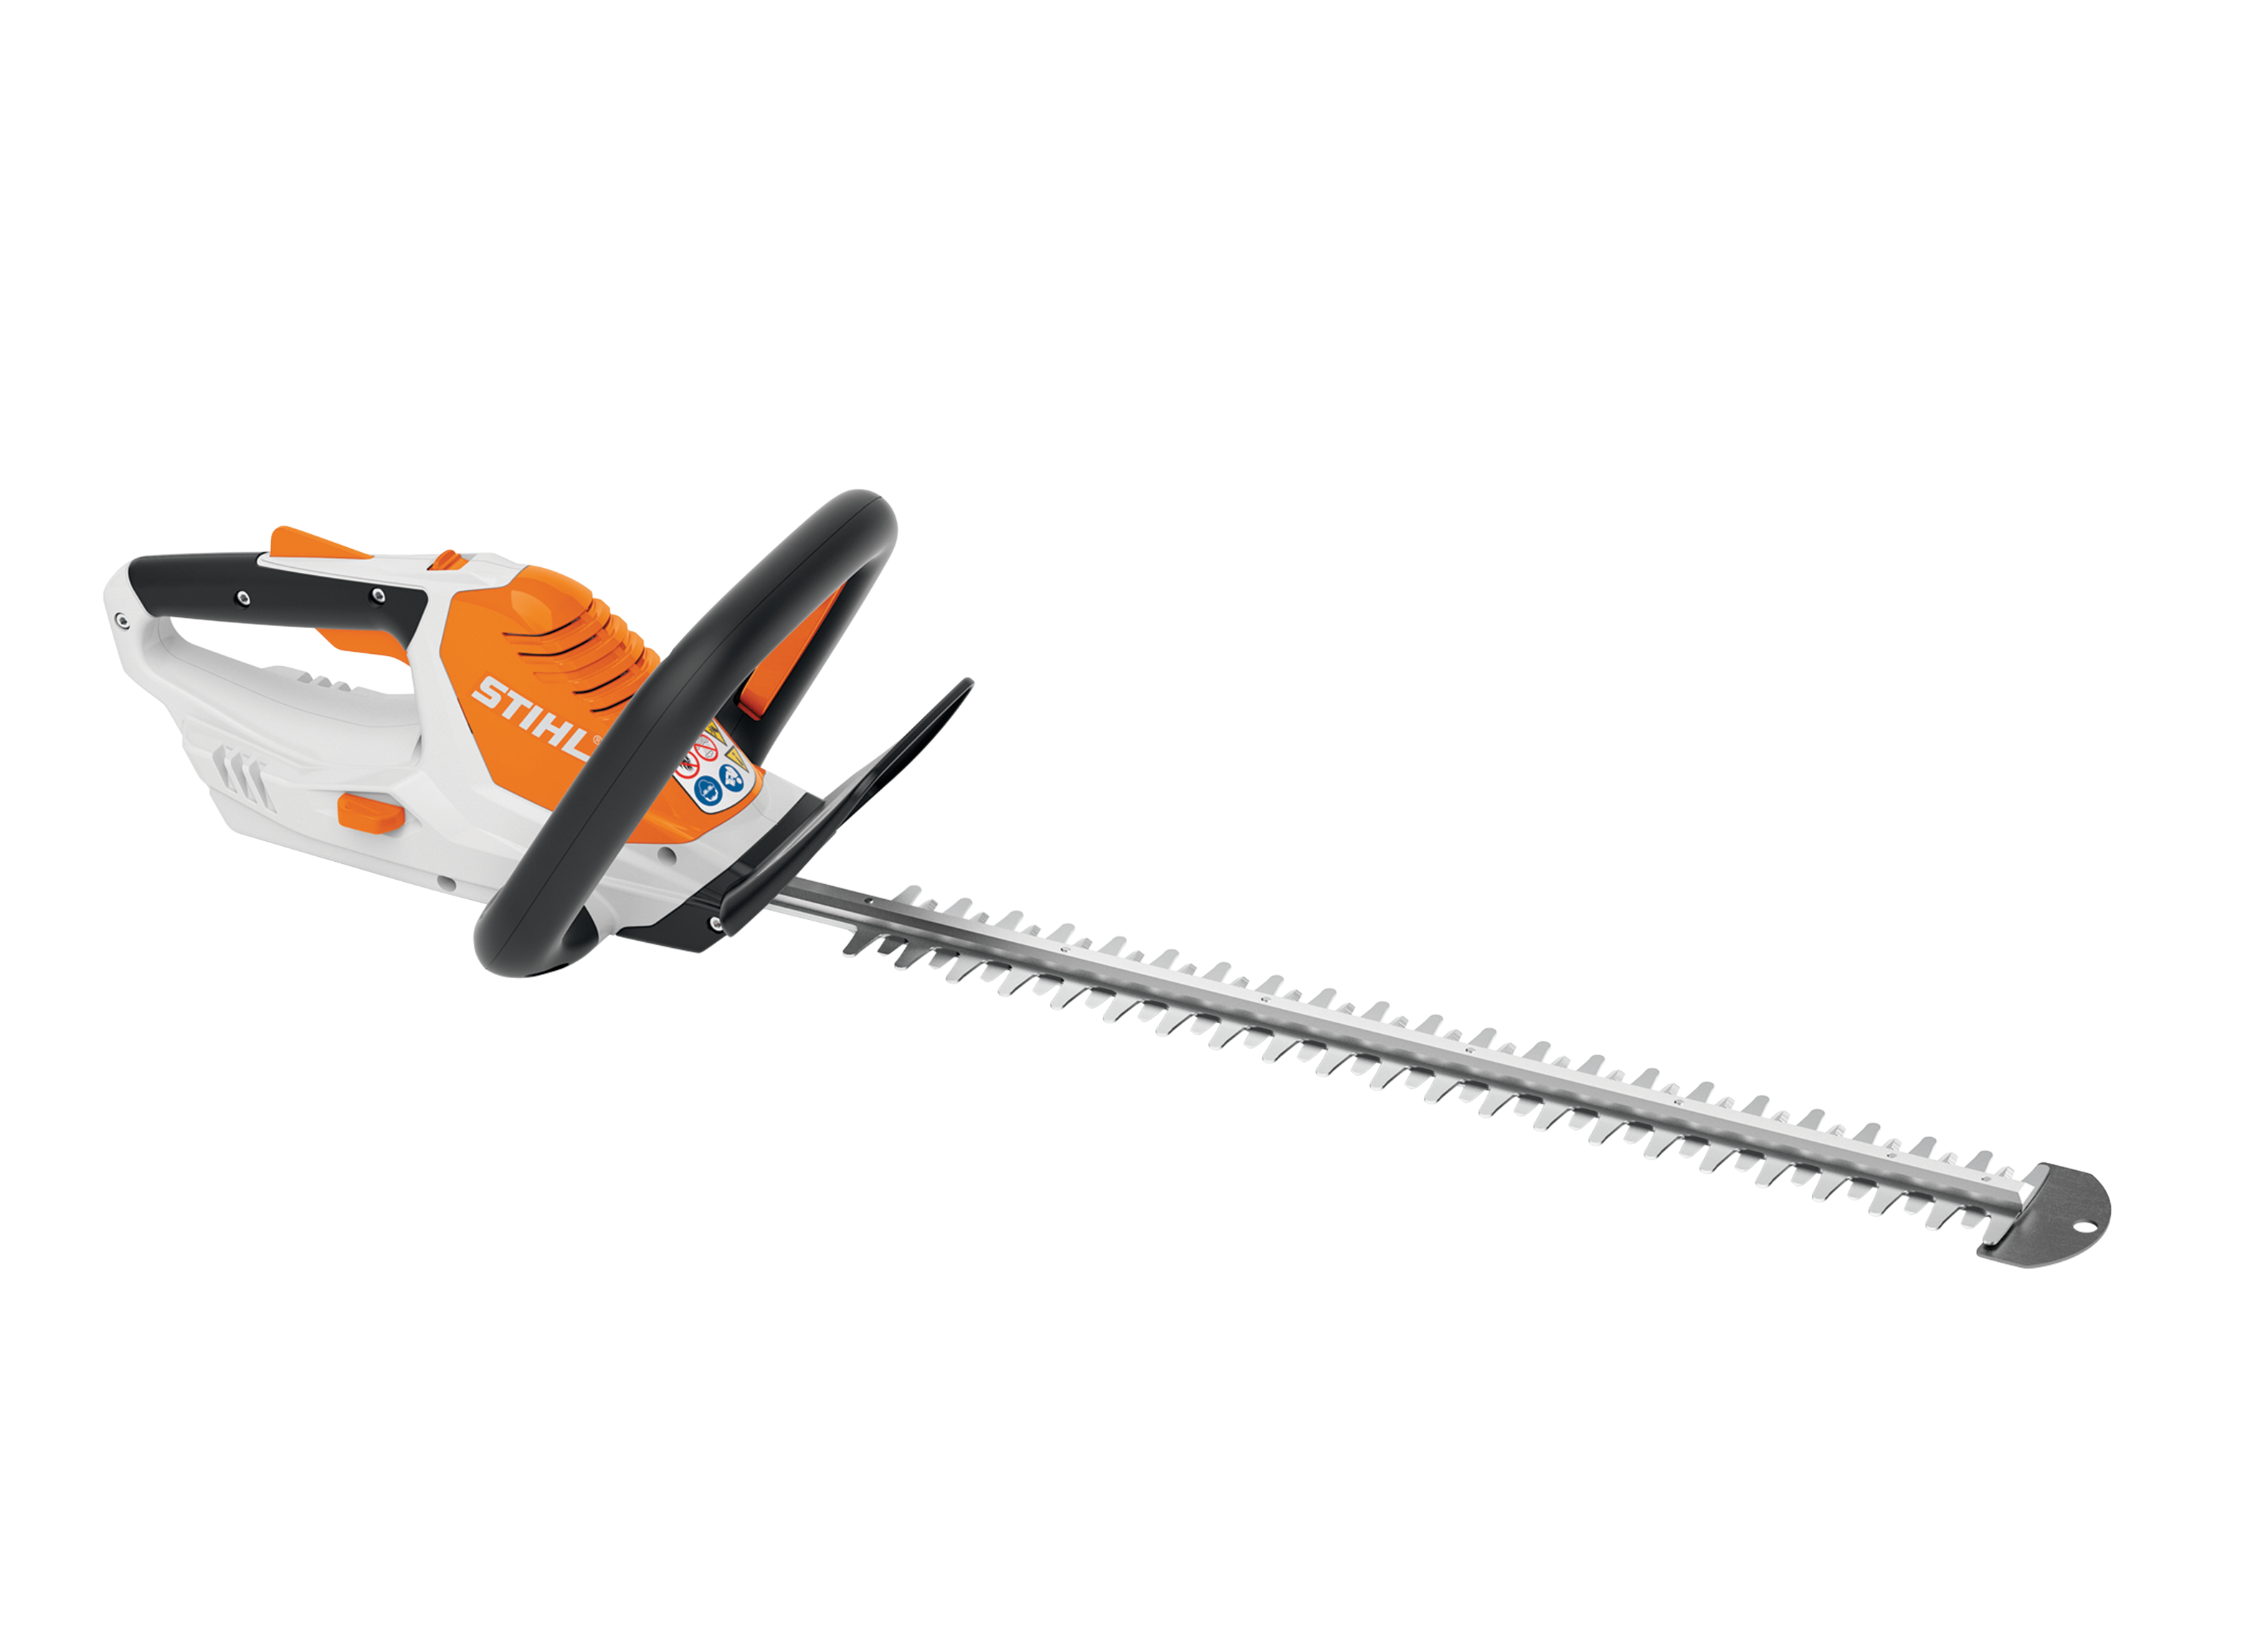 Stihl HSA 45 Hedge Trimmer Review - Consumer Reports